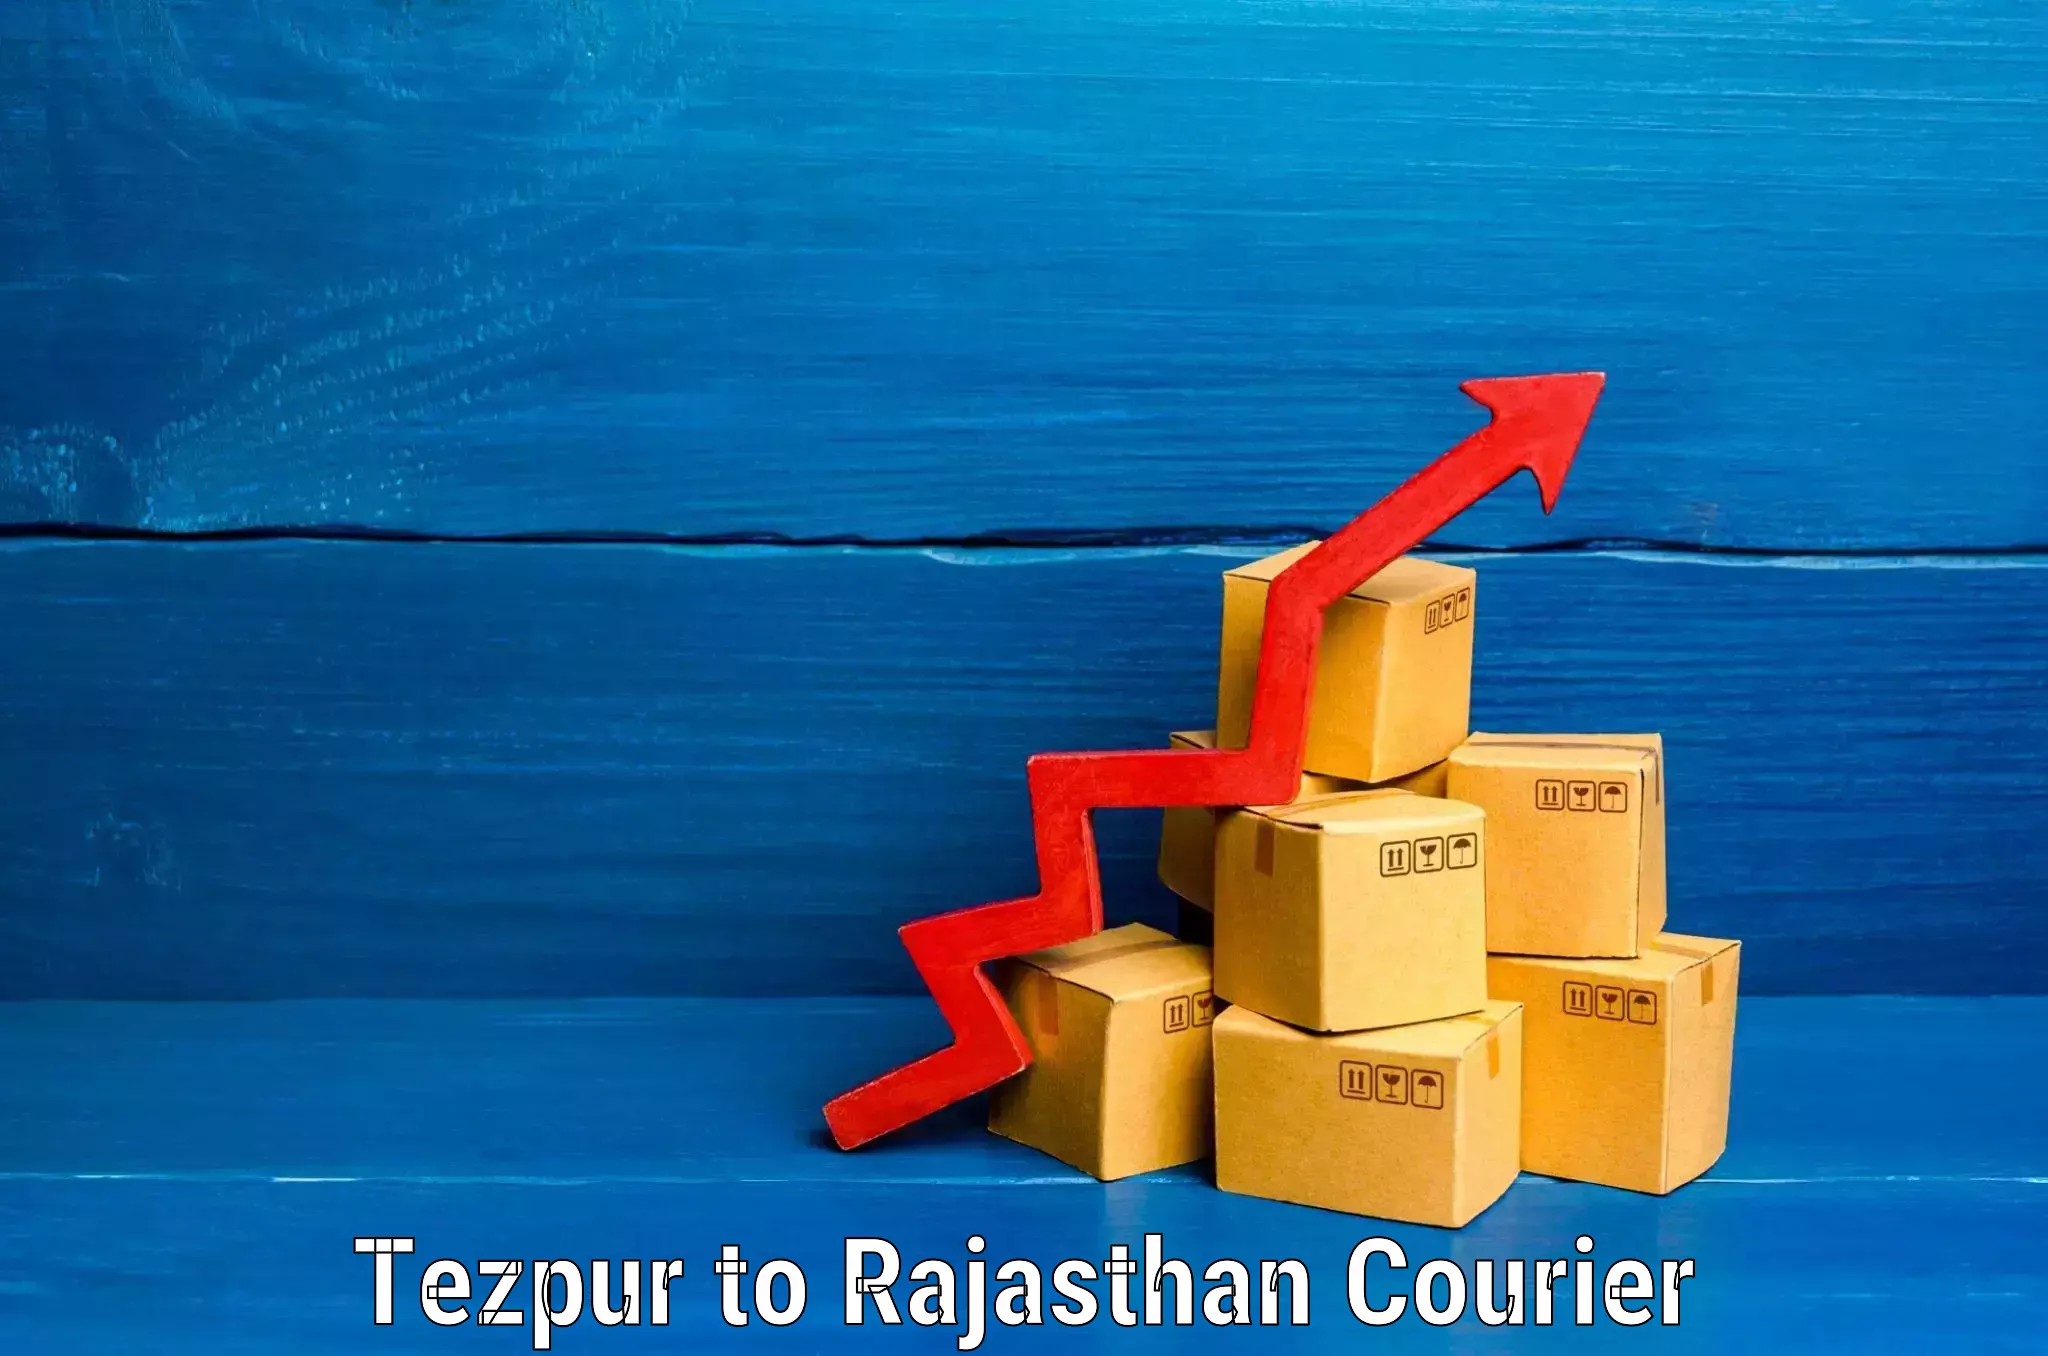 Luggage shipment specialists Tezpur to Pilani